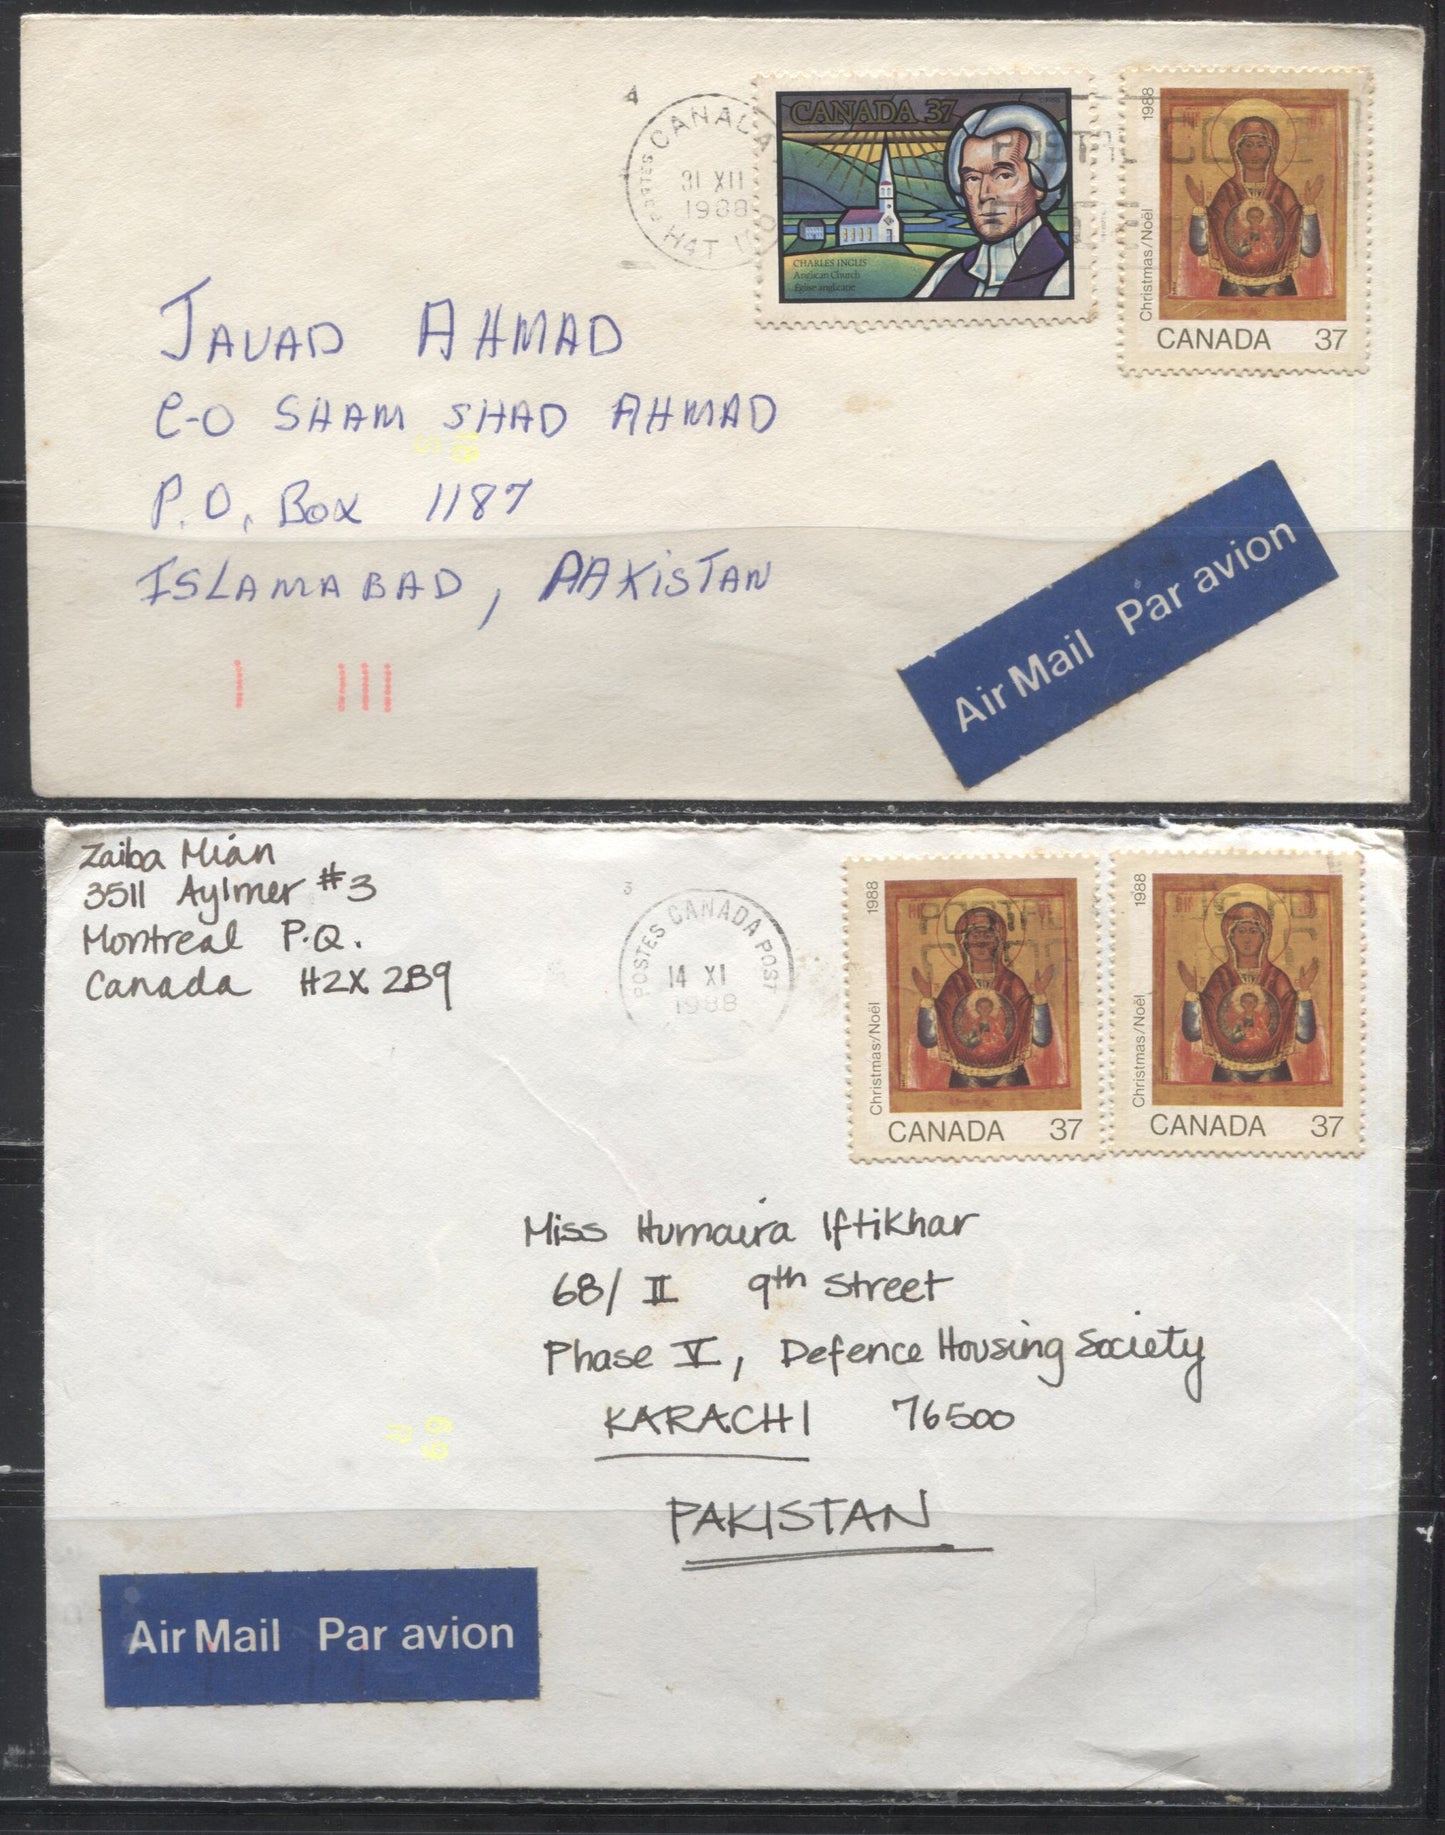 Lot 47 Canada #1222, 1226 37c Multicoloured Charles Inglis & Madonna & Child, 1988 Christmas & Charles Inglis, 2 VF Airmail Covers to Pakistan